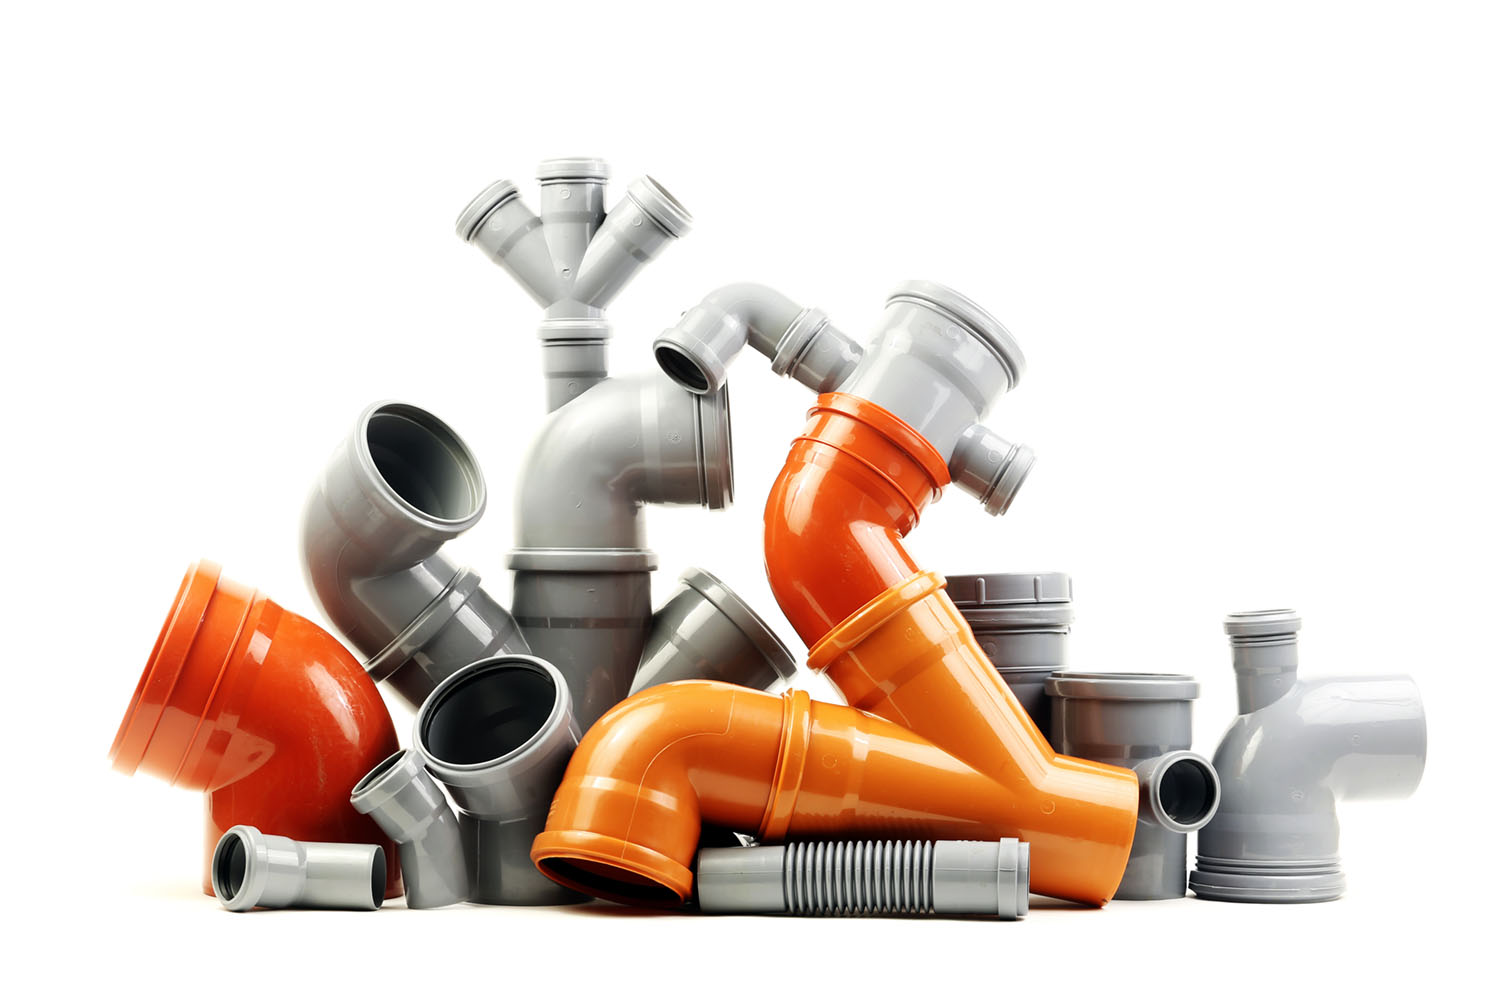 Stack of orange and grey PVC electrical fittings